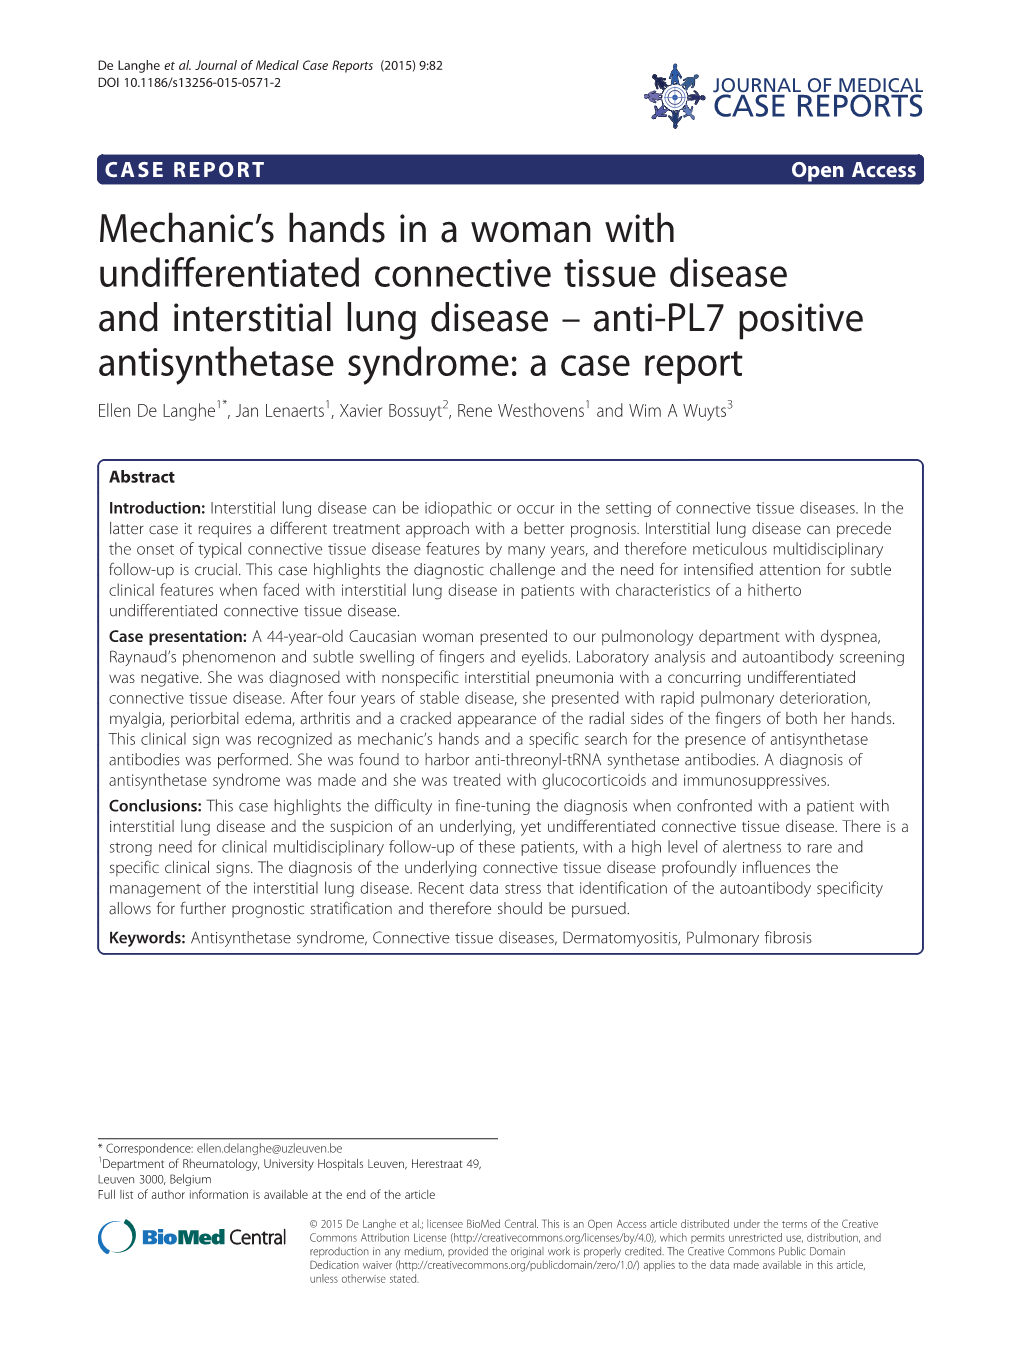 Mechanicłs Hands in a Woman with Undifferentiated Connective Tissue